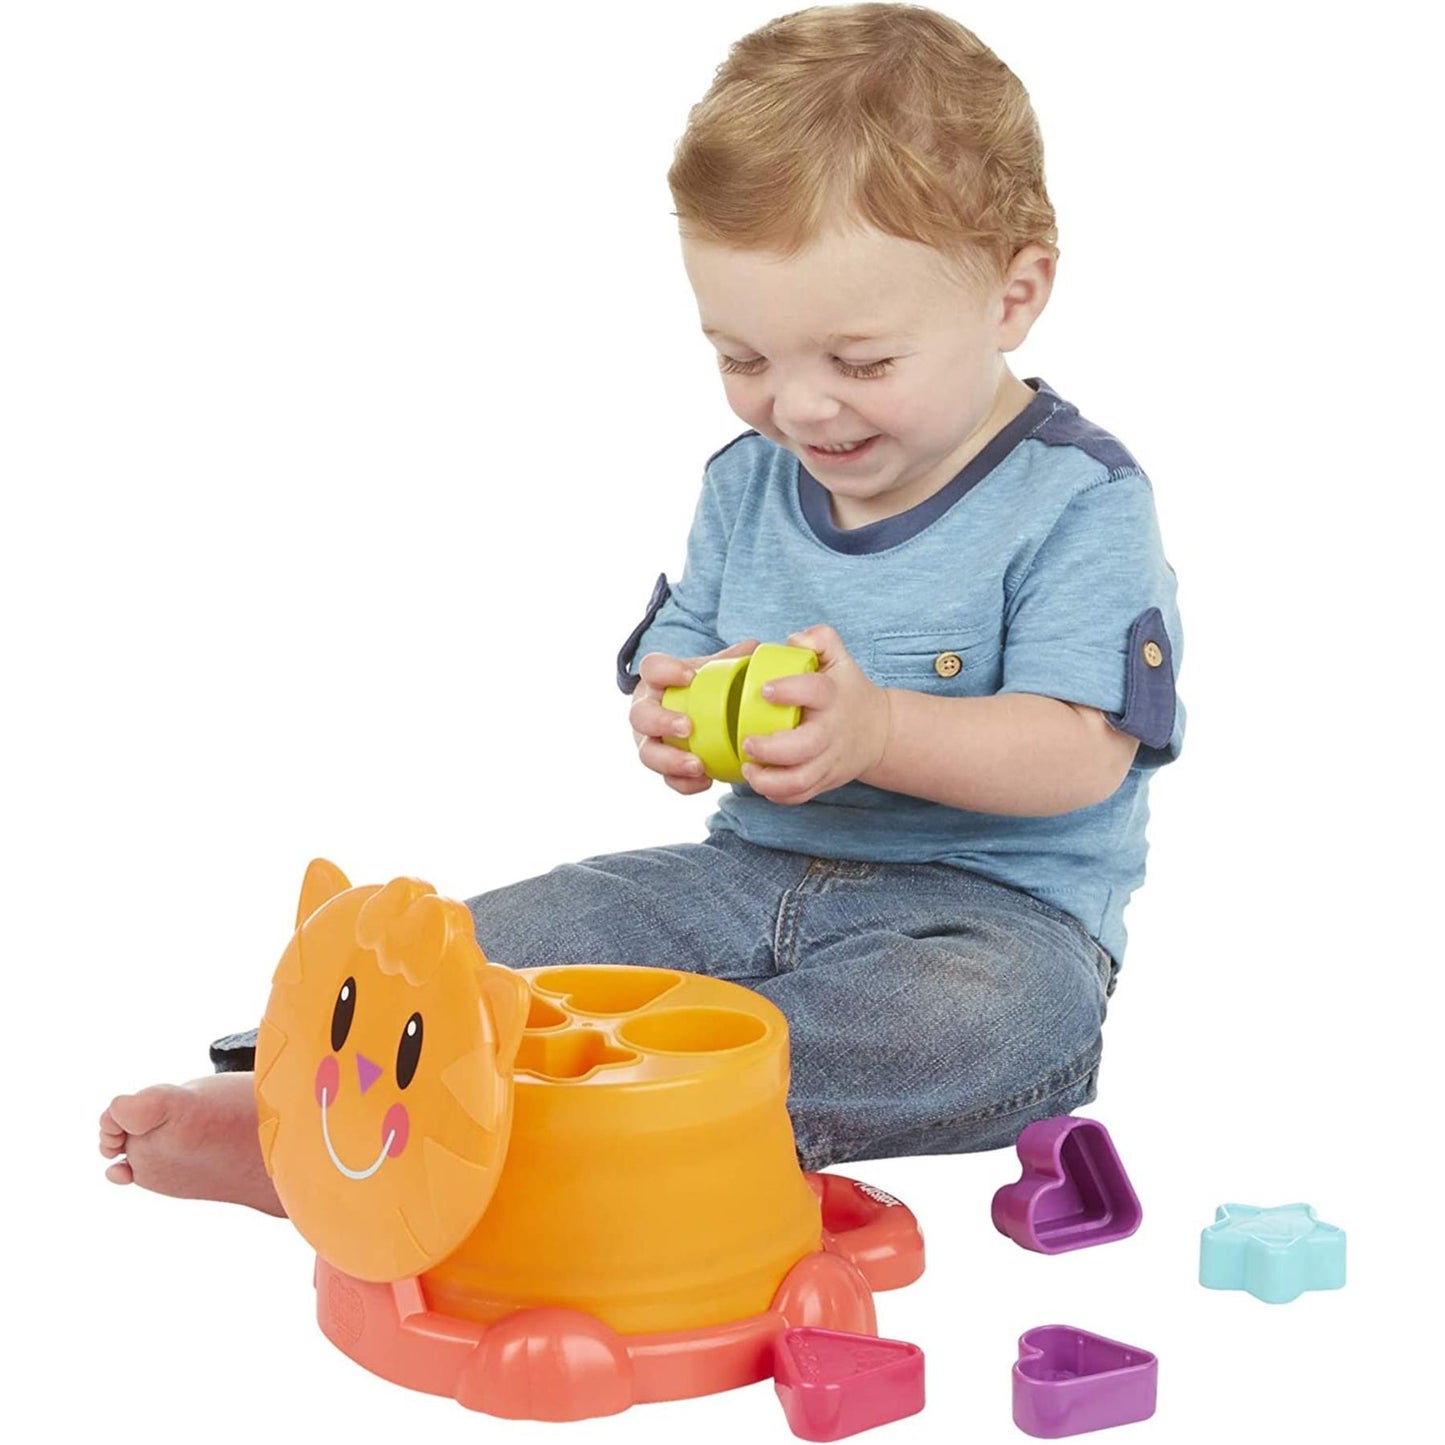 Playskool Pop Up Shape Sorter, Toddler Activity Toy, 18m + by The Magic Toy Shop - UKBuyZone